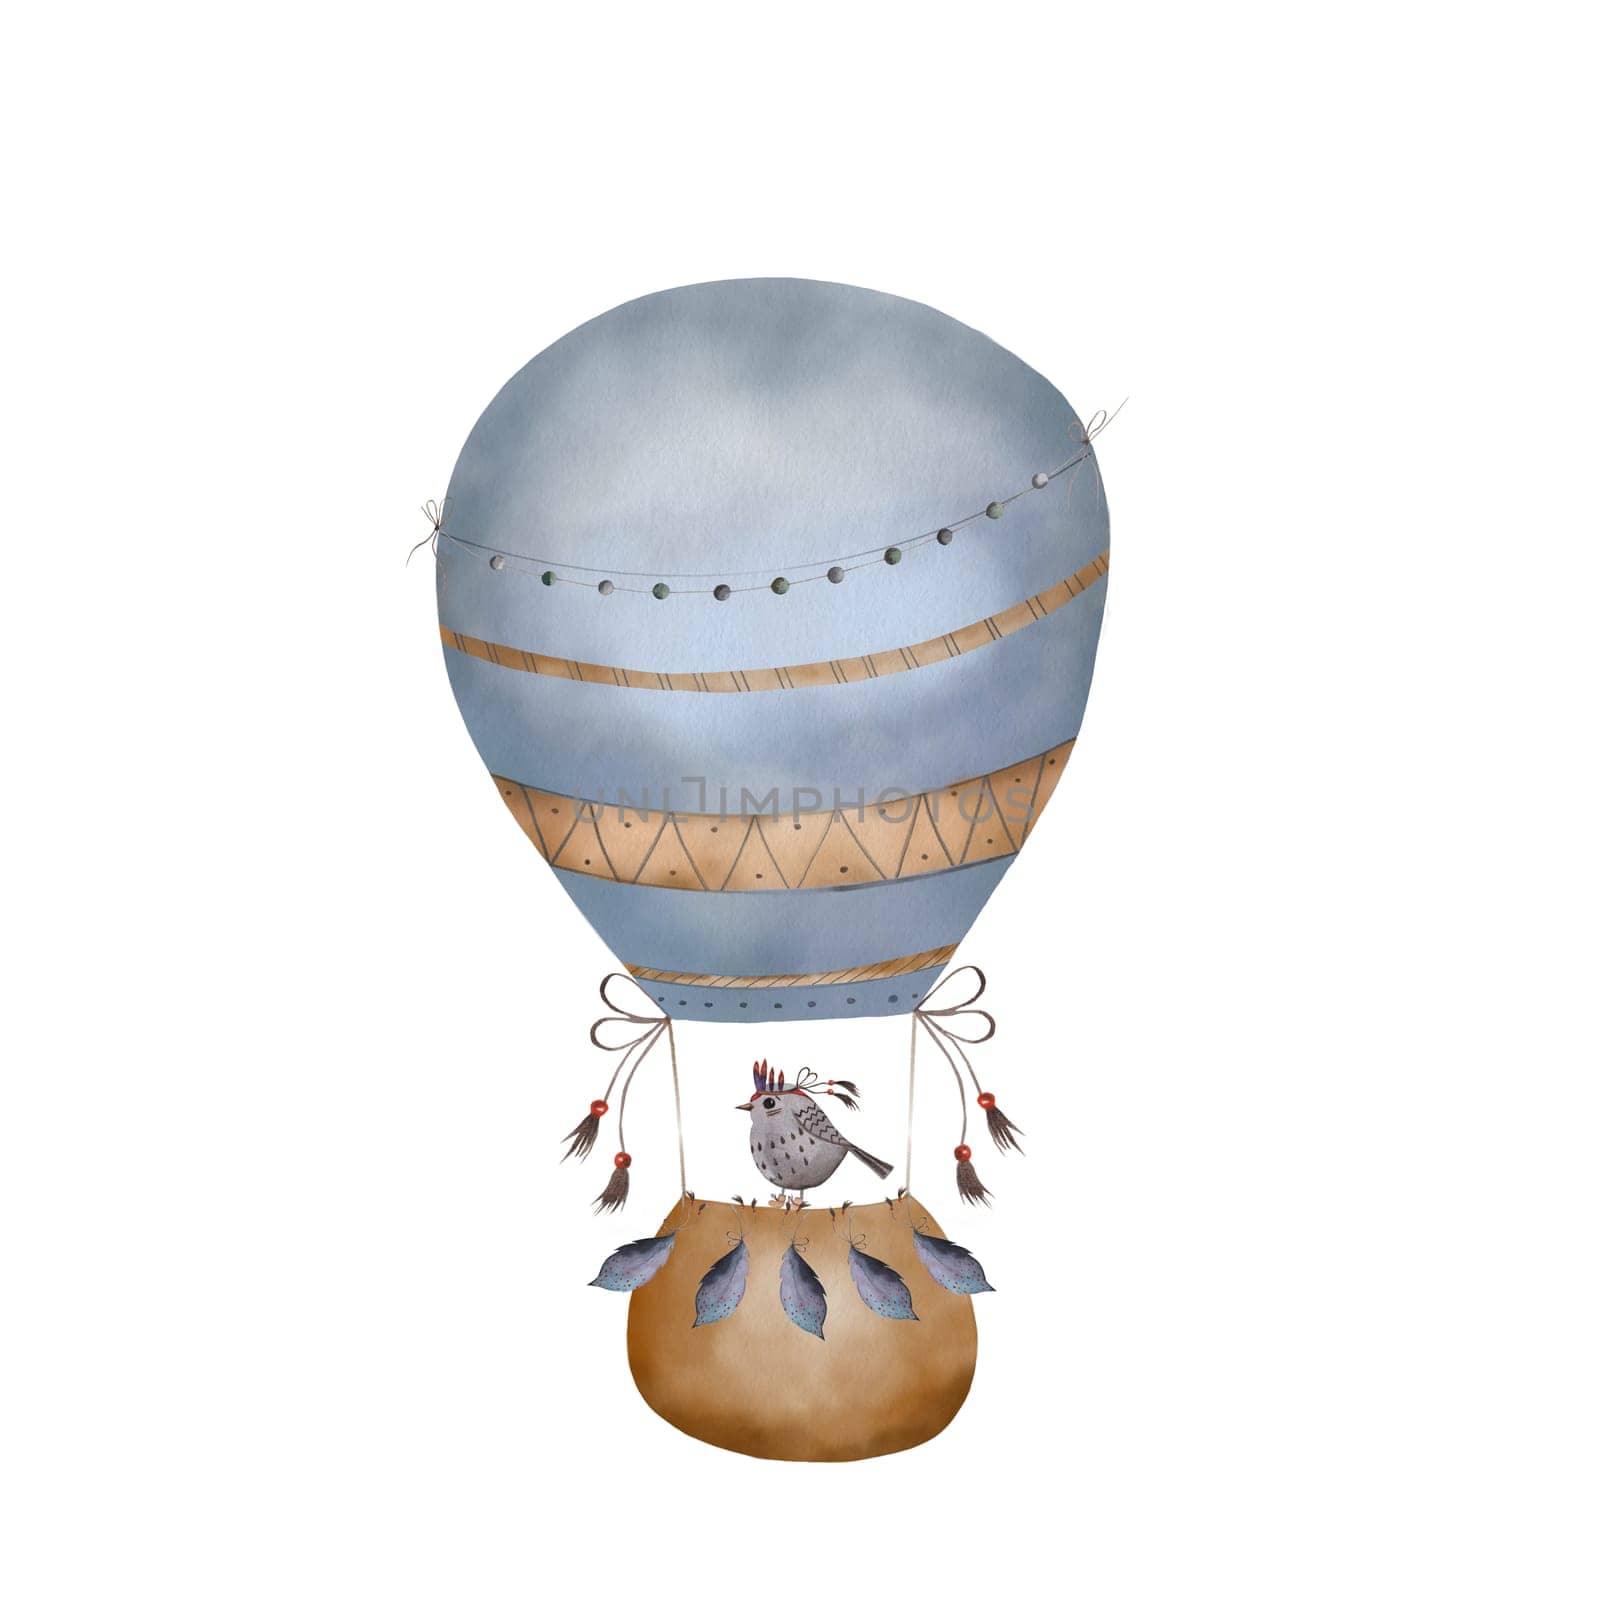 Watercolor blue boho balloon with basket and bird. Hand painted illustration for children's design in cartoon style. Cute hot air painting for logo or print on children's textile in pastel colors by TatyanaTrushcheleva